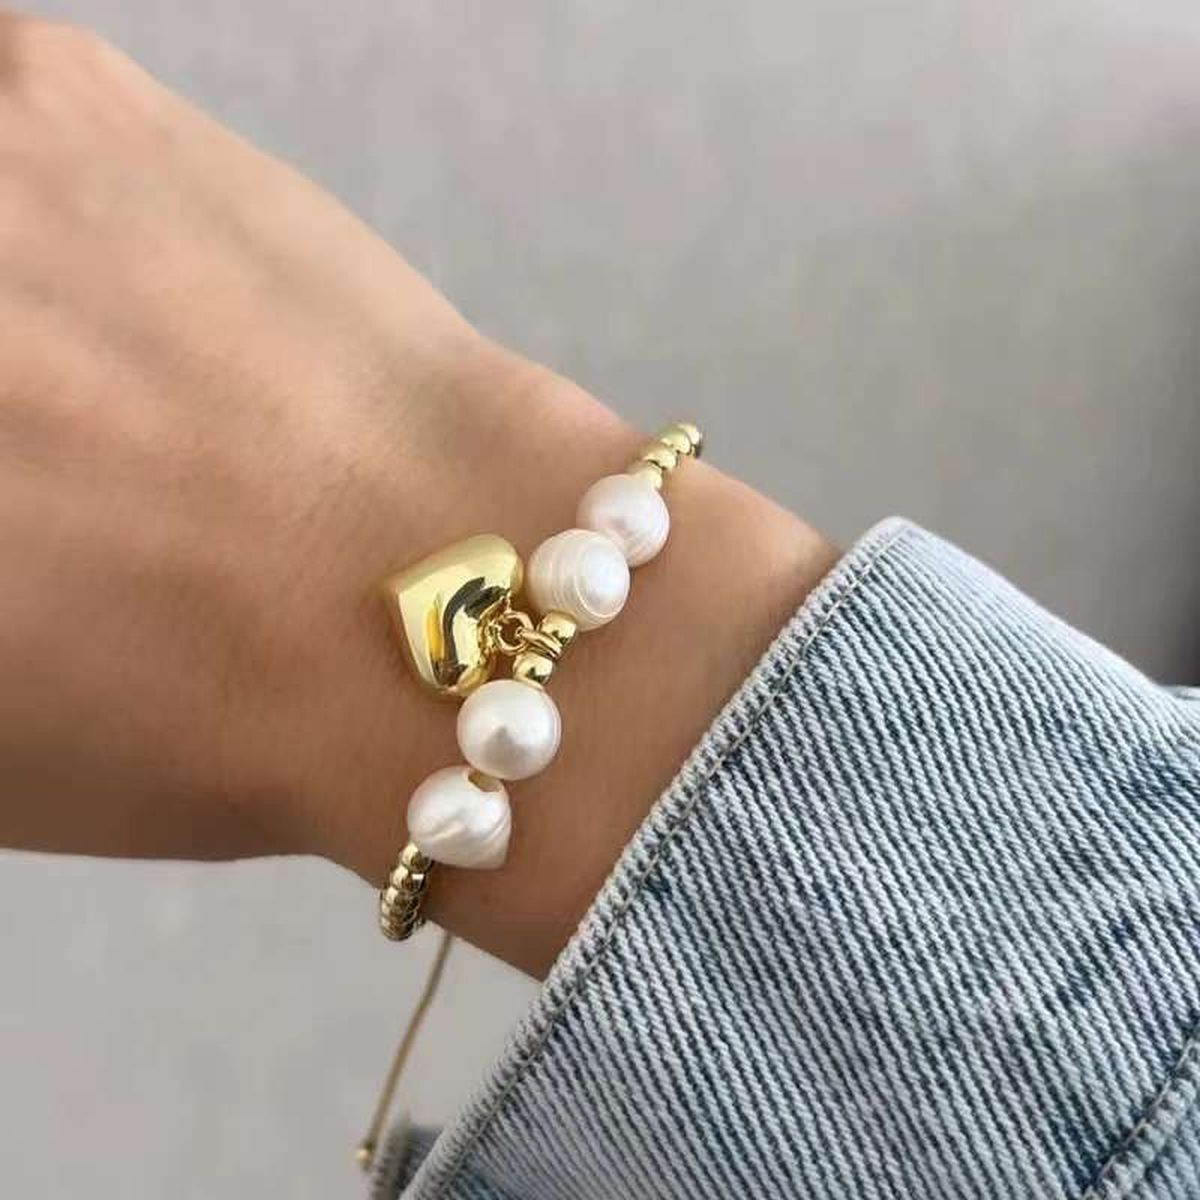 Buy Hearts and Pearls Bracelet Online in India - Etsy